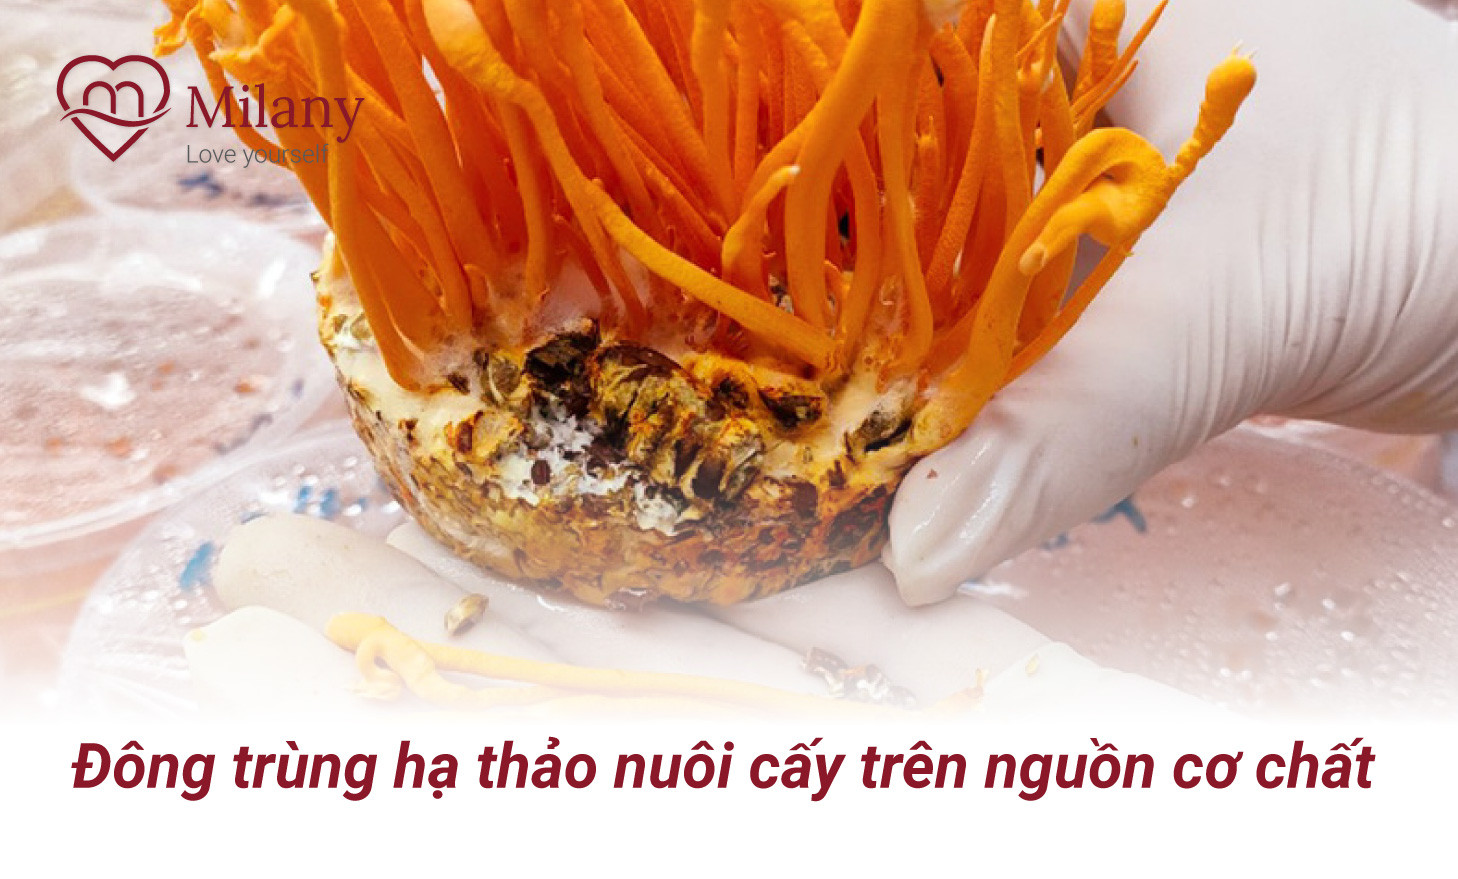 nuoi cay dong trung ha thao